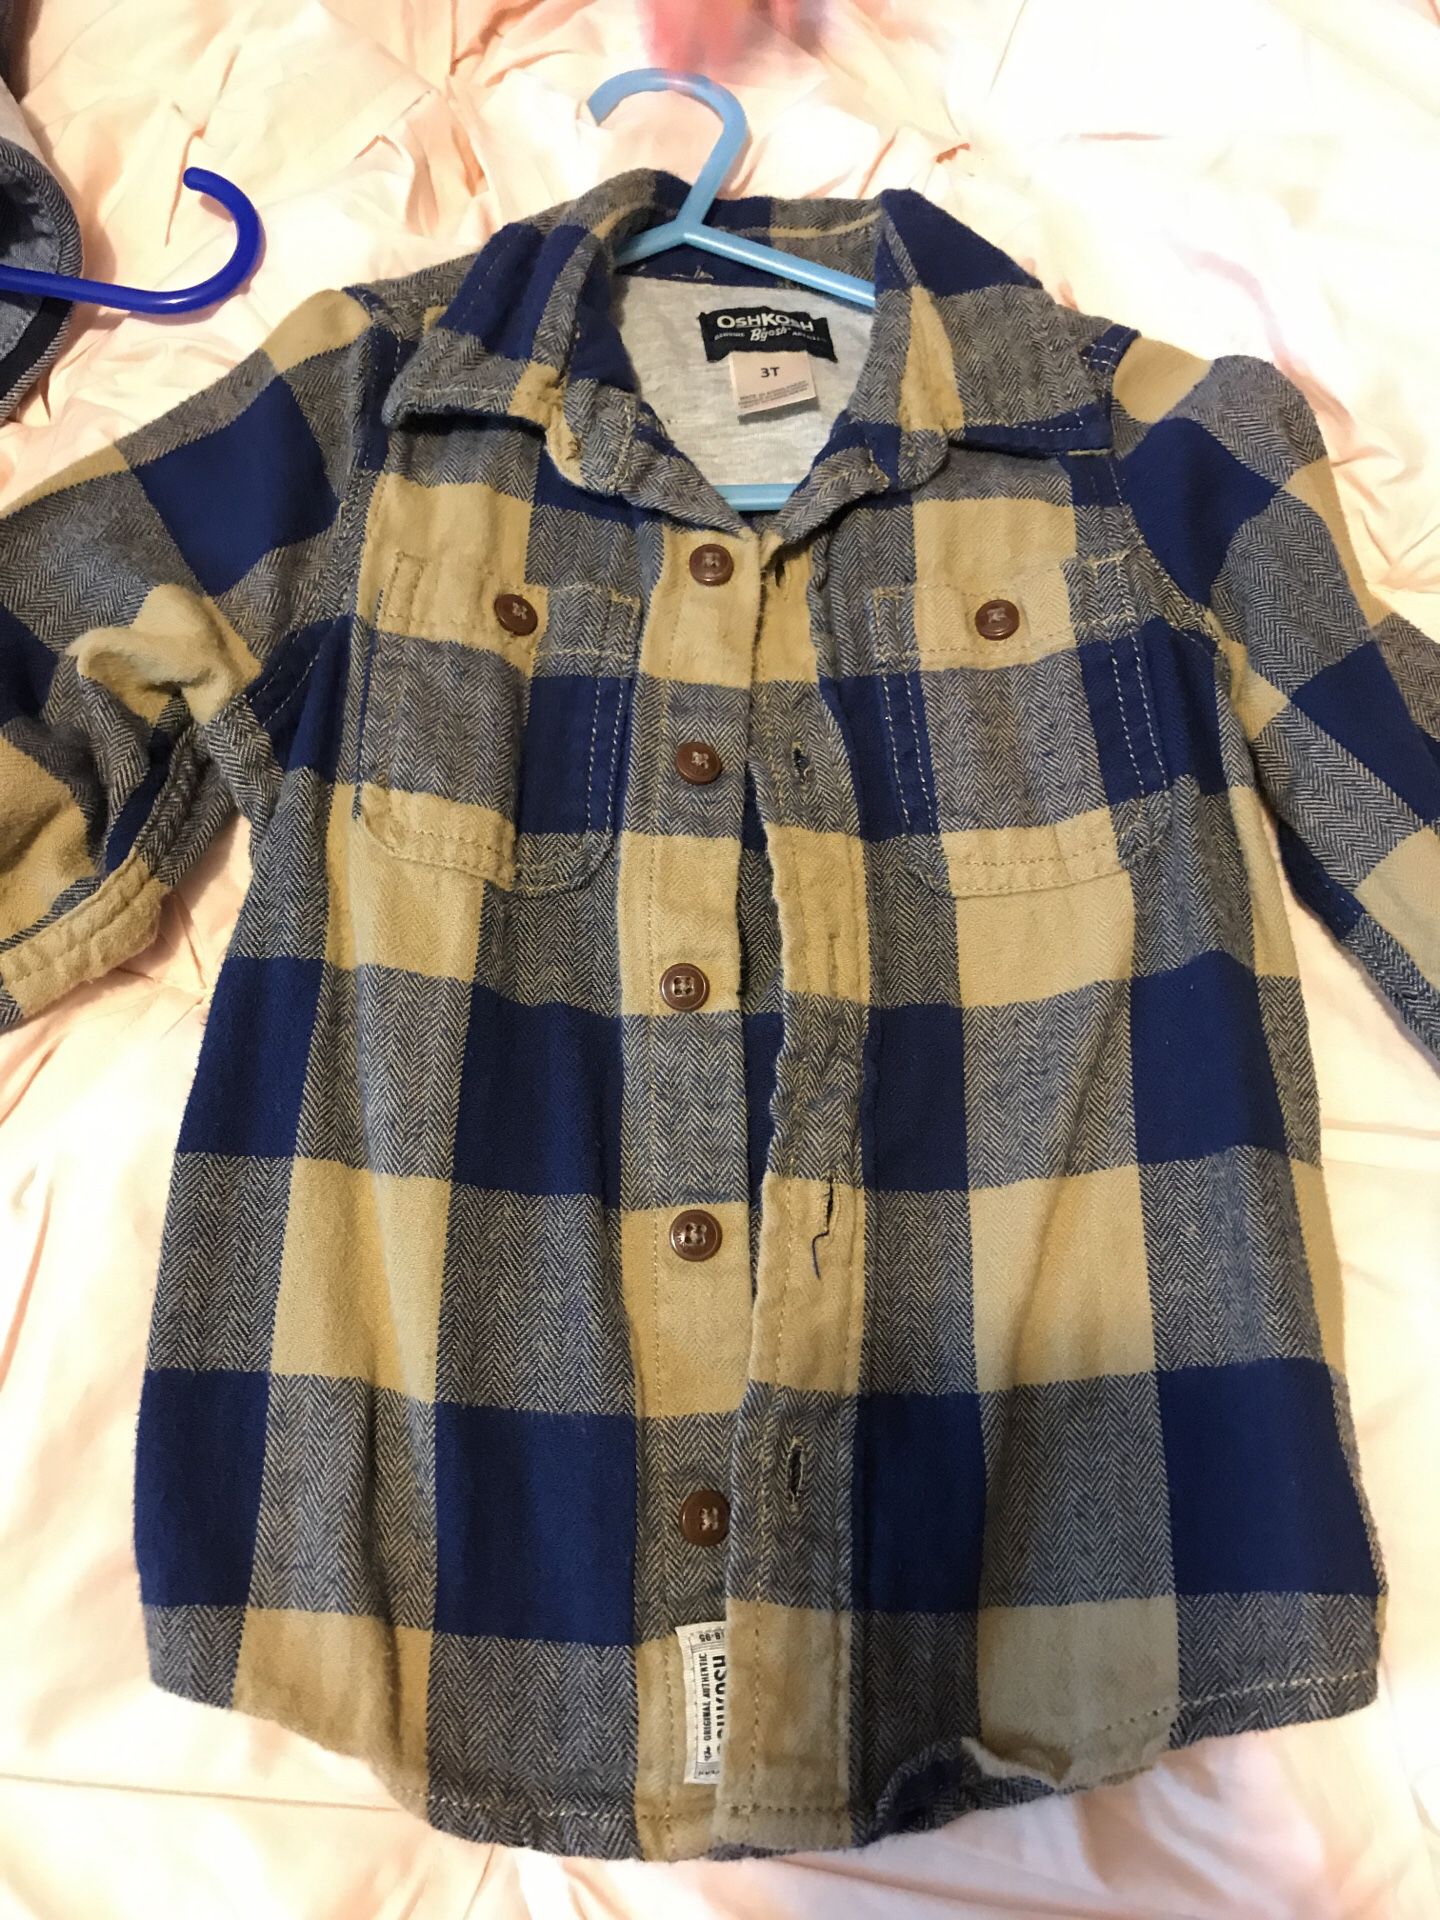 Bundle of toddler clothes!